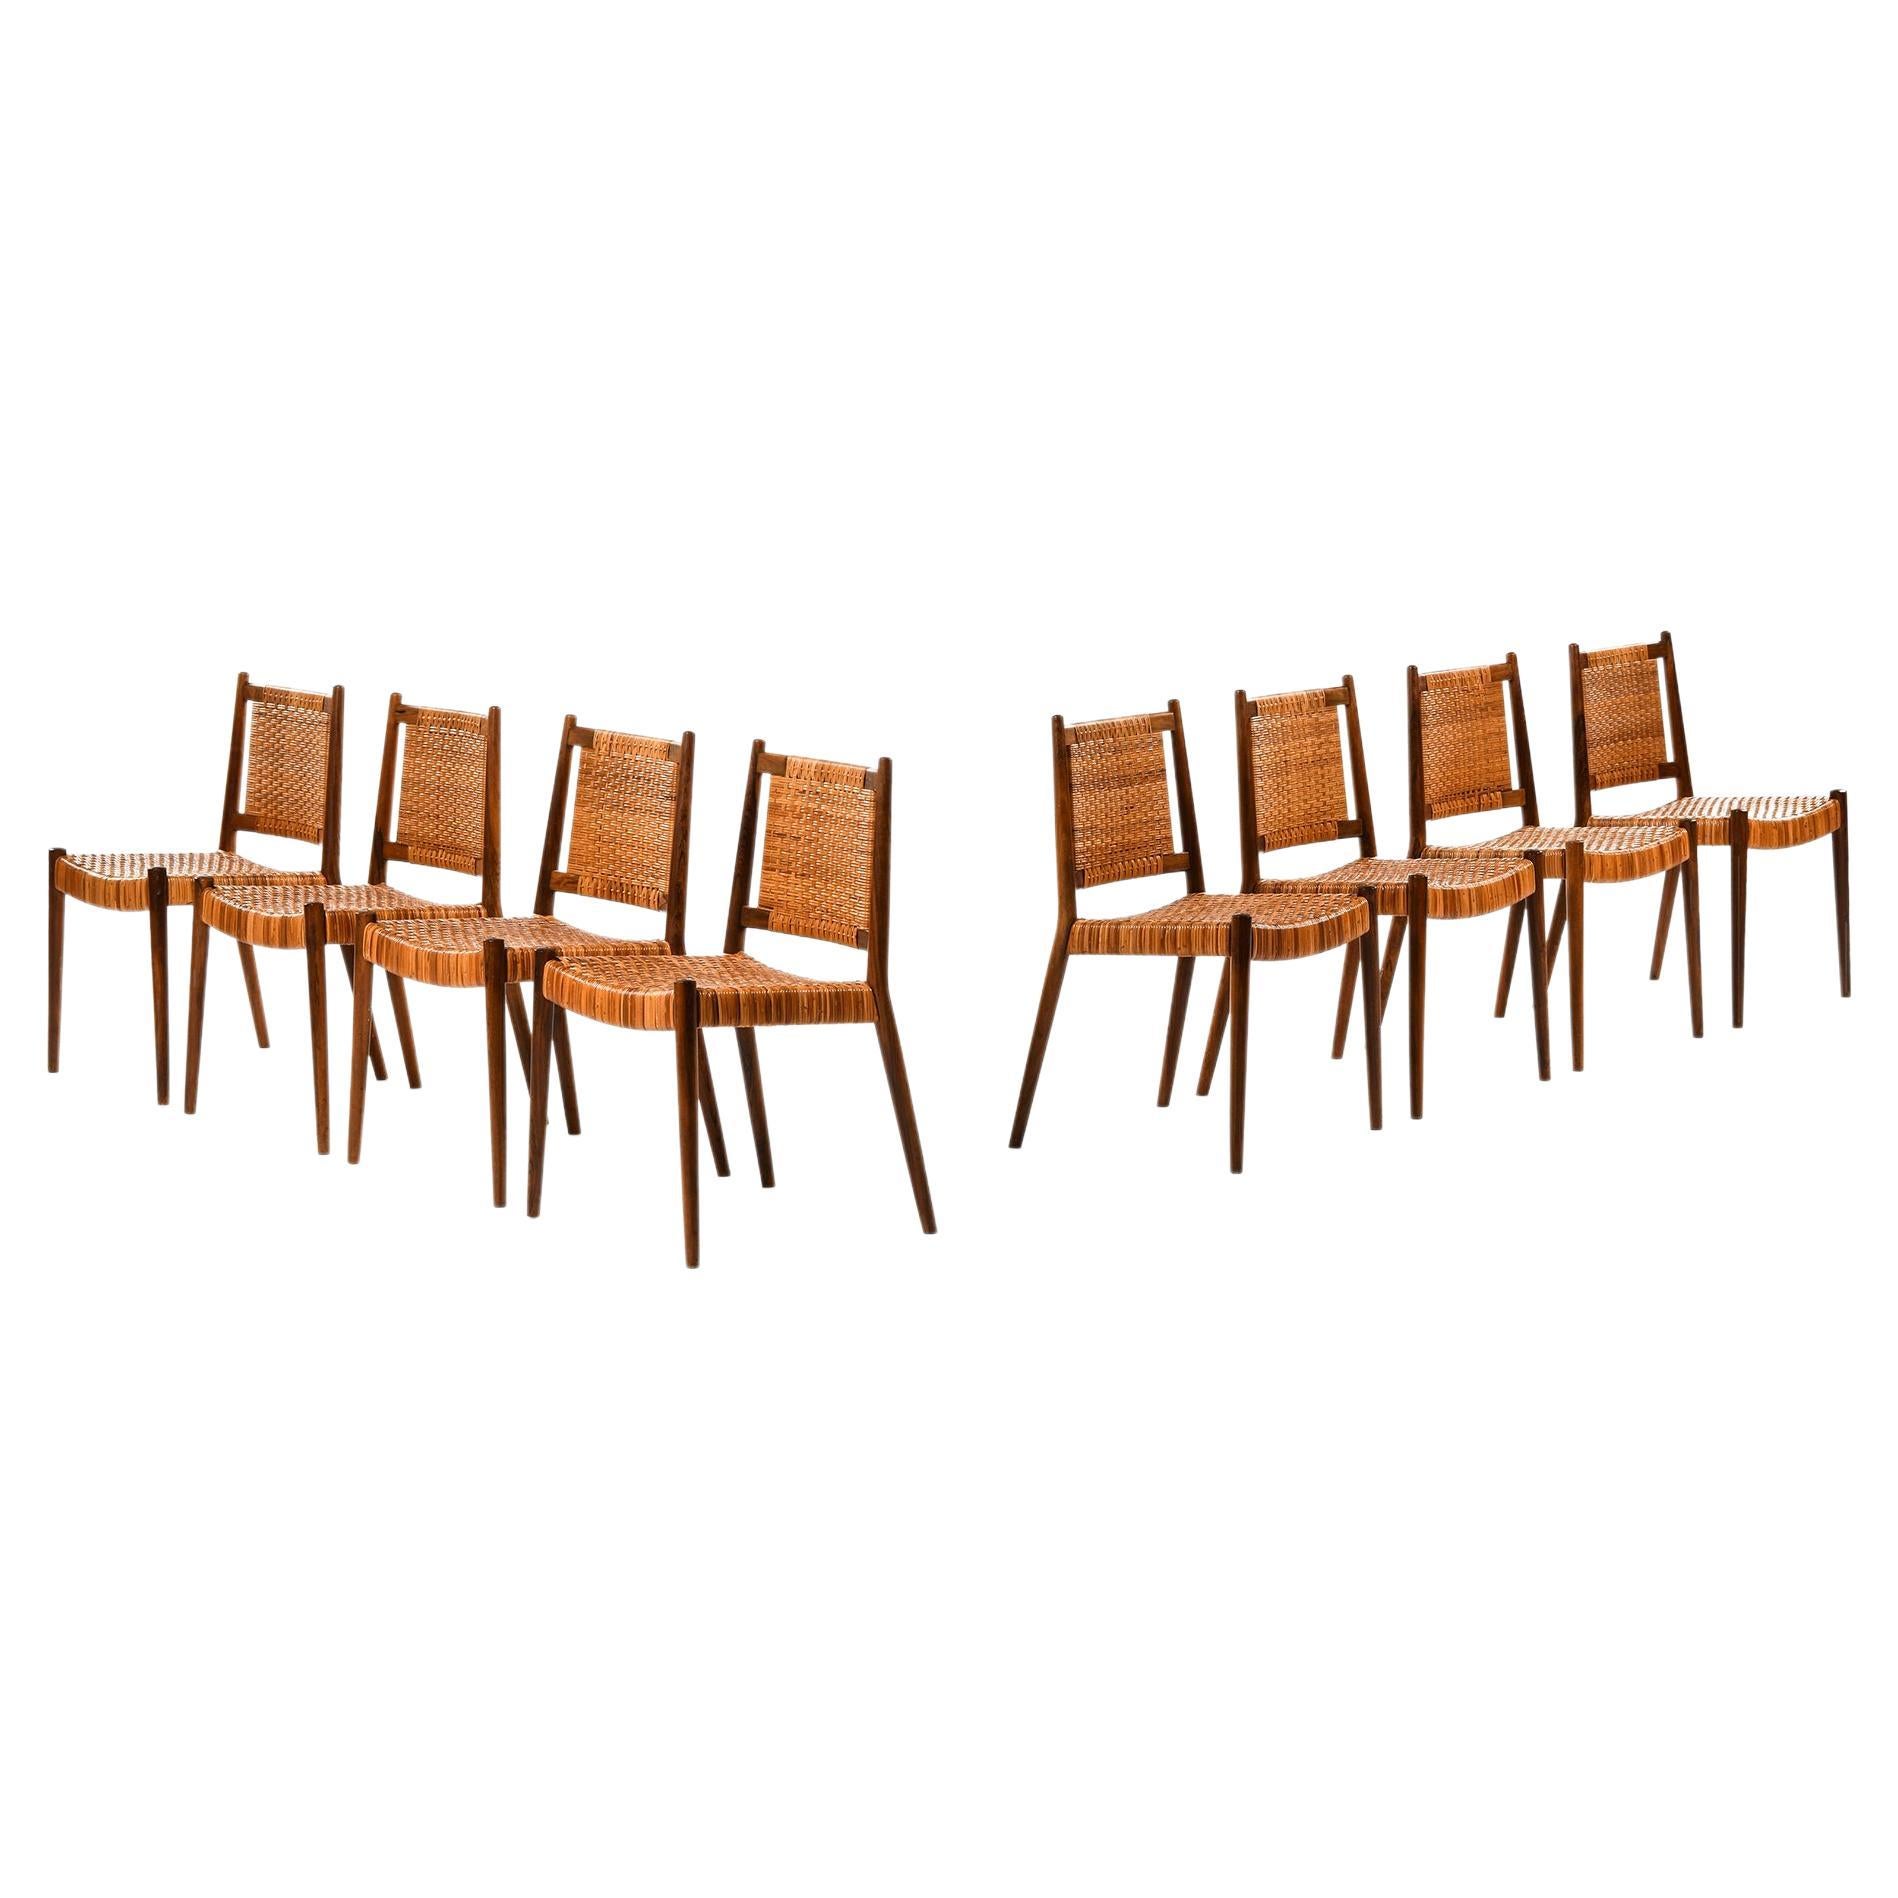 Set of 8 Dining Chairs in Rosewood and Woven Cane by Steffan Syrach-Larsen, 1960 For Sale